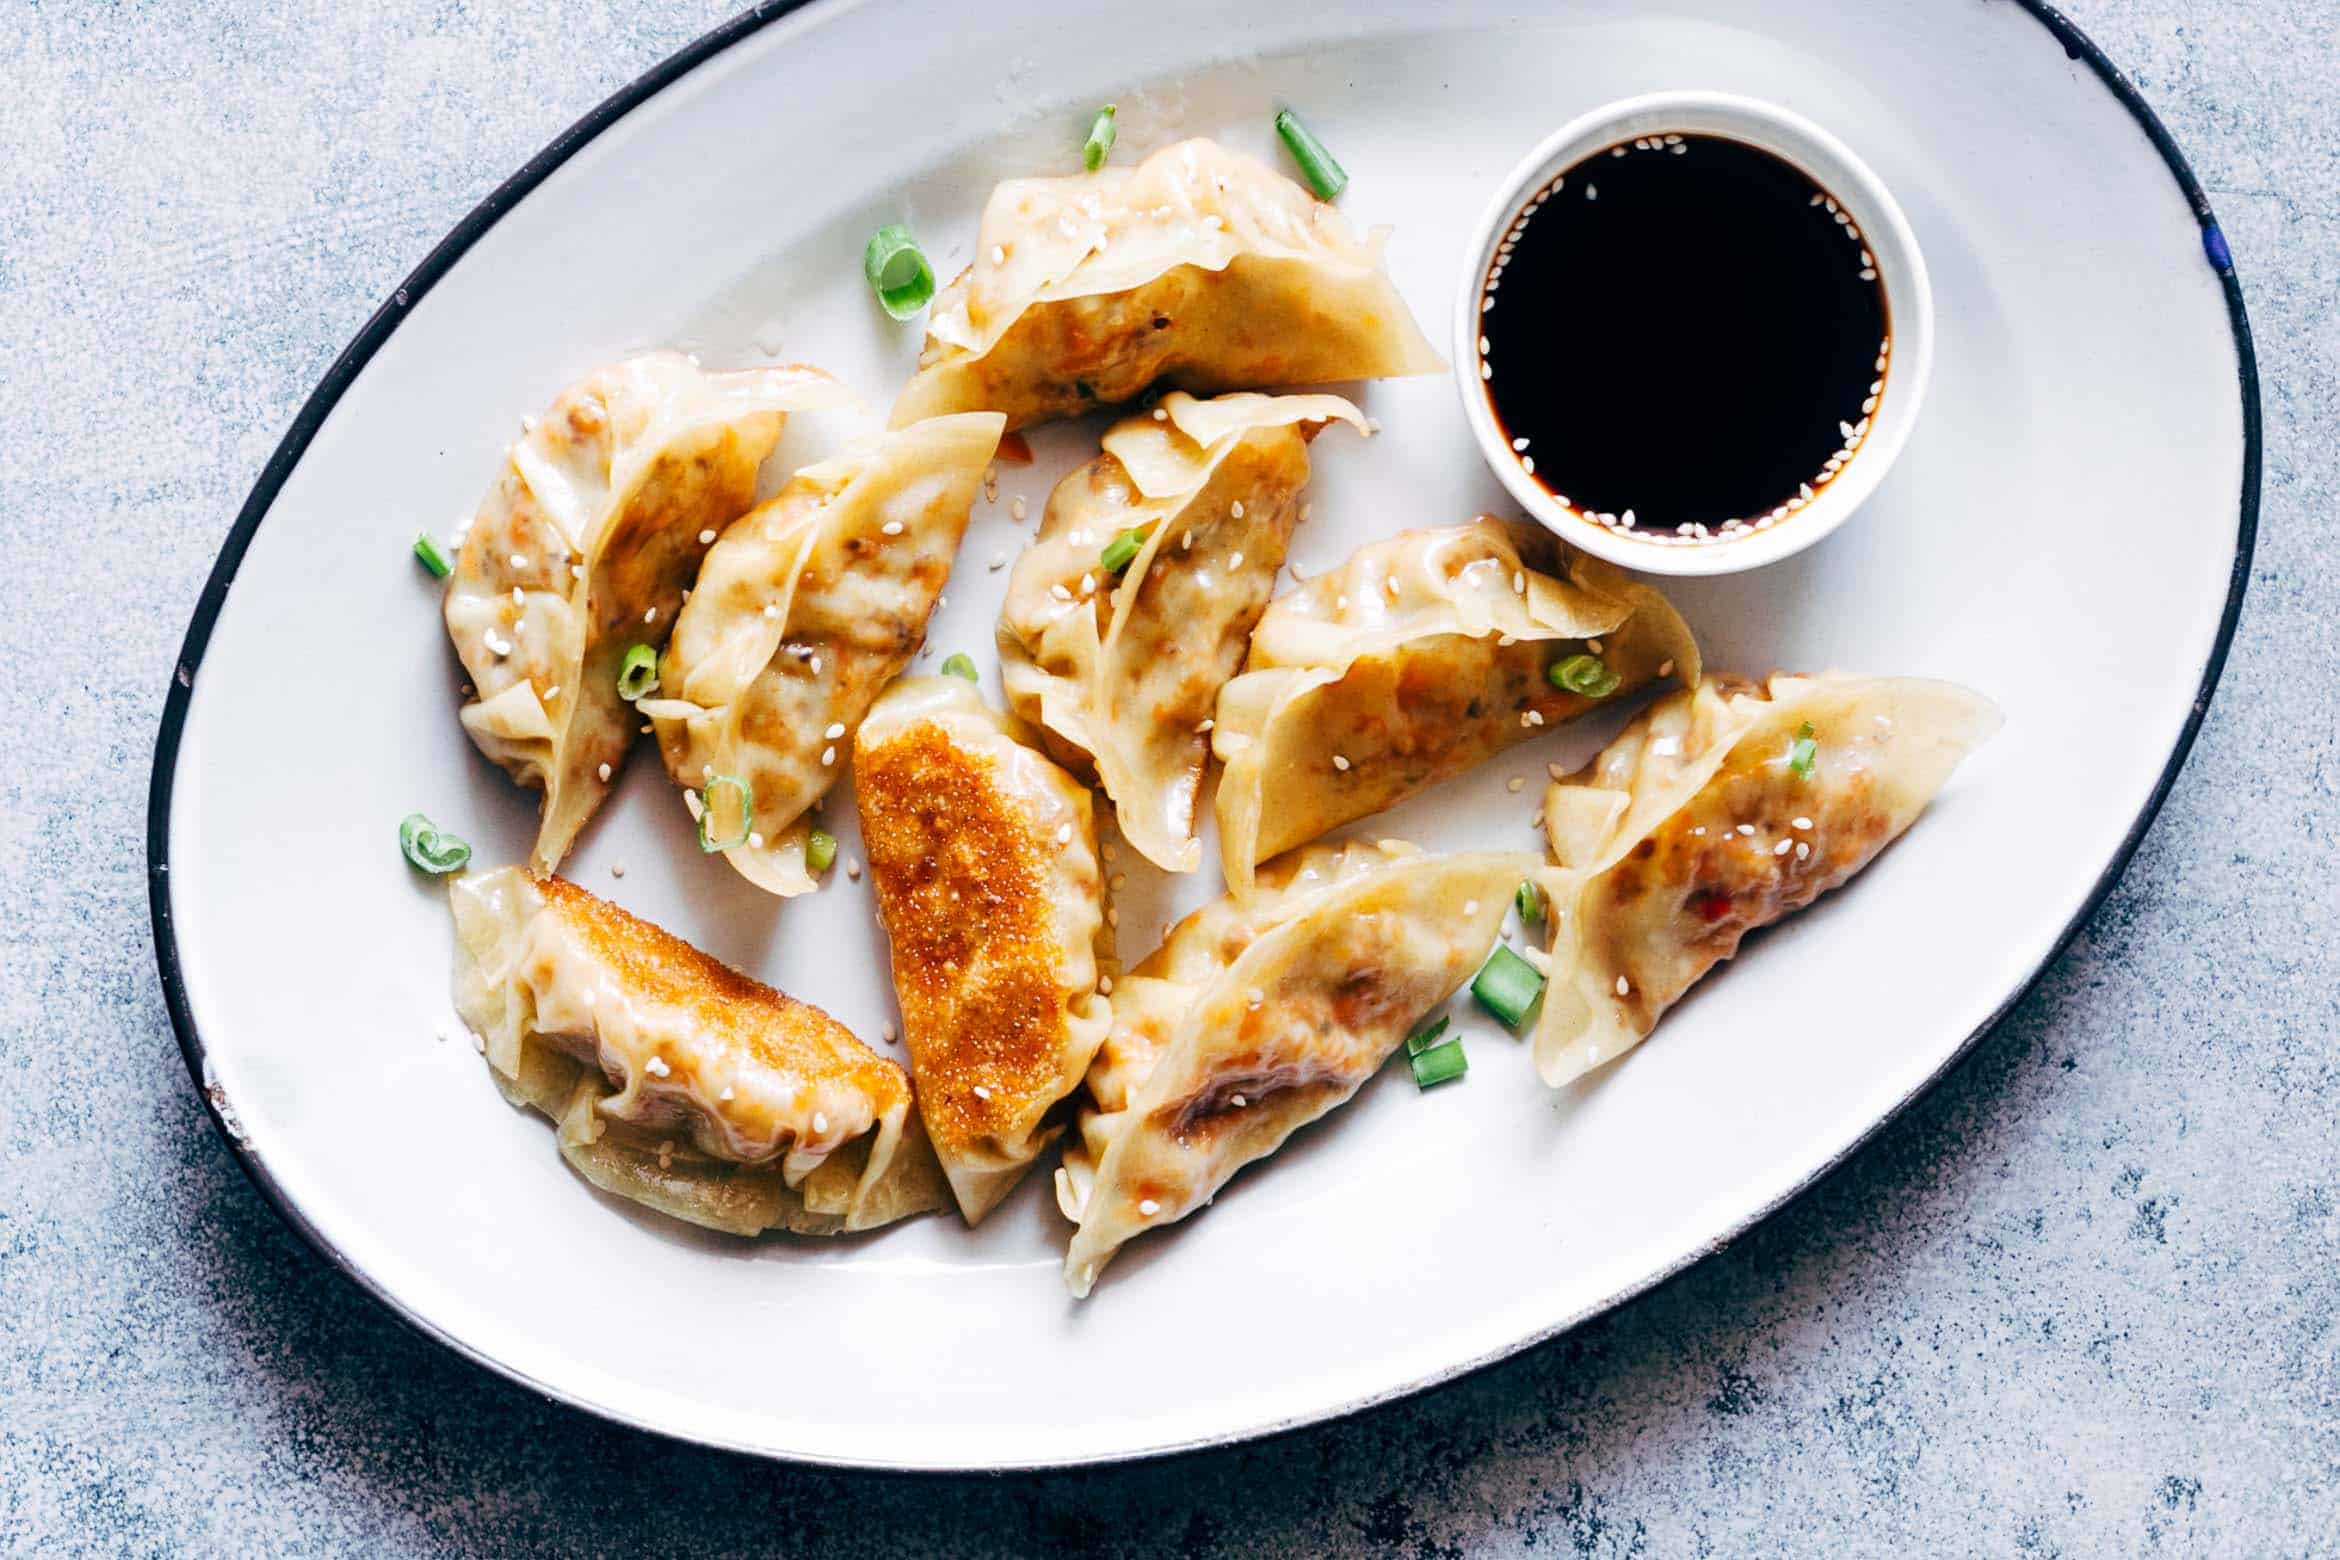 These vegetarian gyoza potstickers are stuffed with a delicious mixture of carrot, shiitake mushrooms and paneer and are insanely ease to make! Don't be intimidated because I have step by step instructions for you to make them at home.